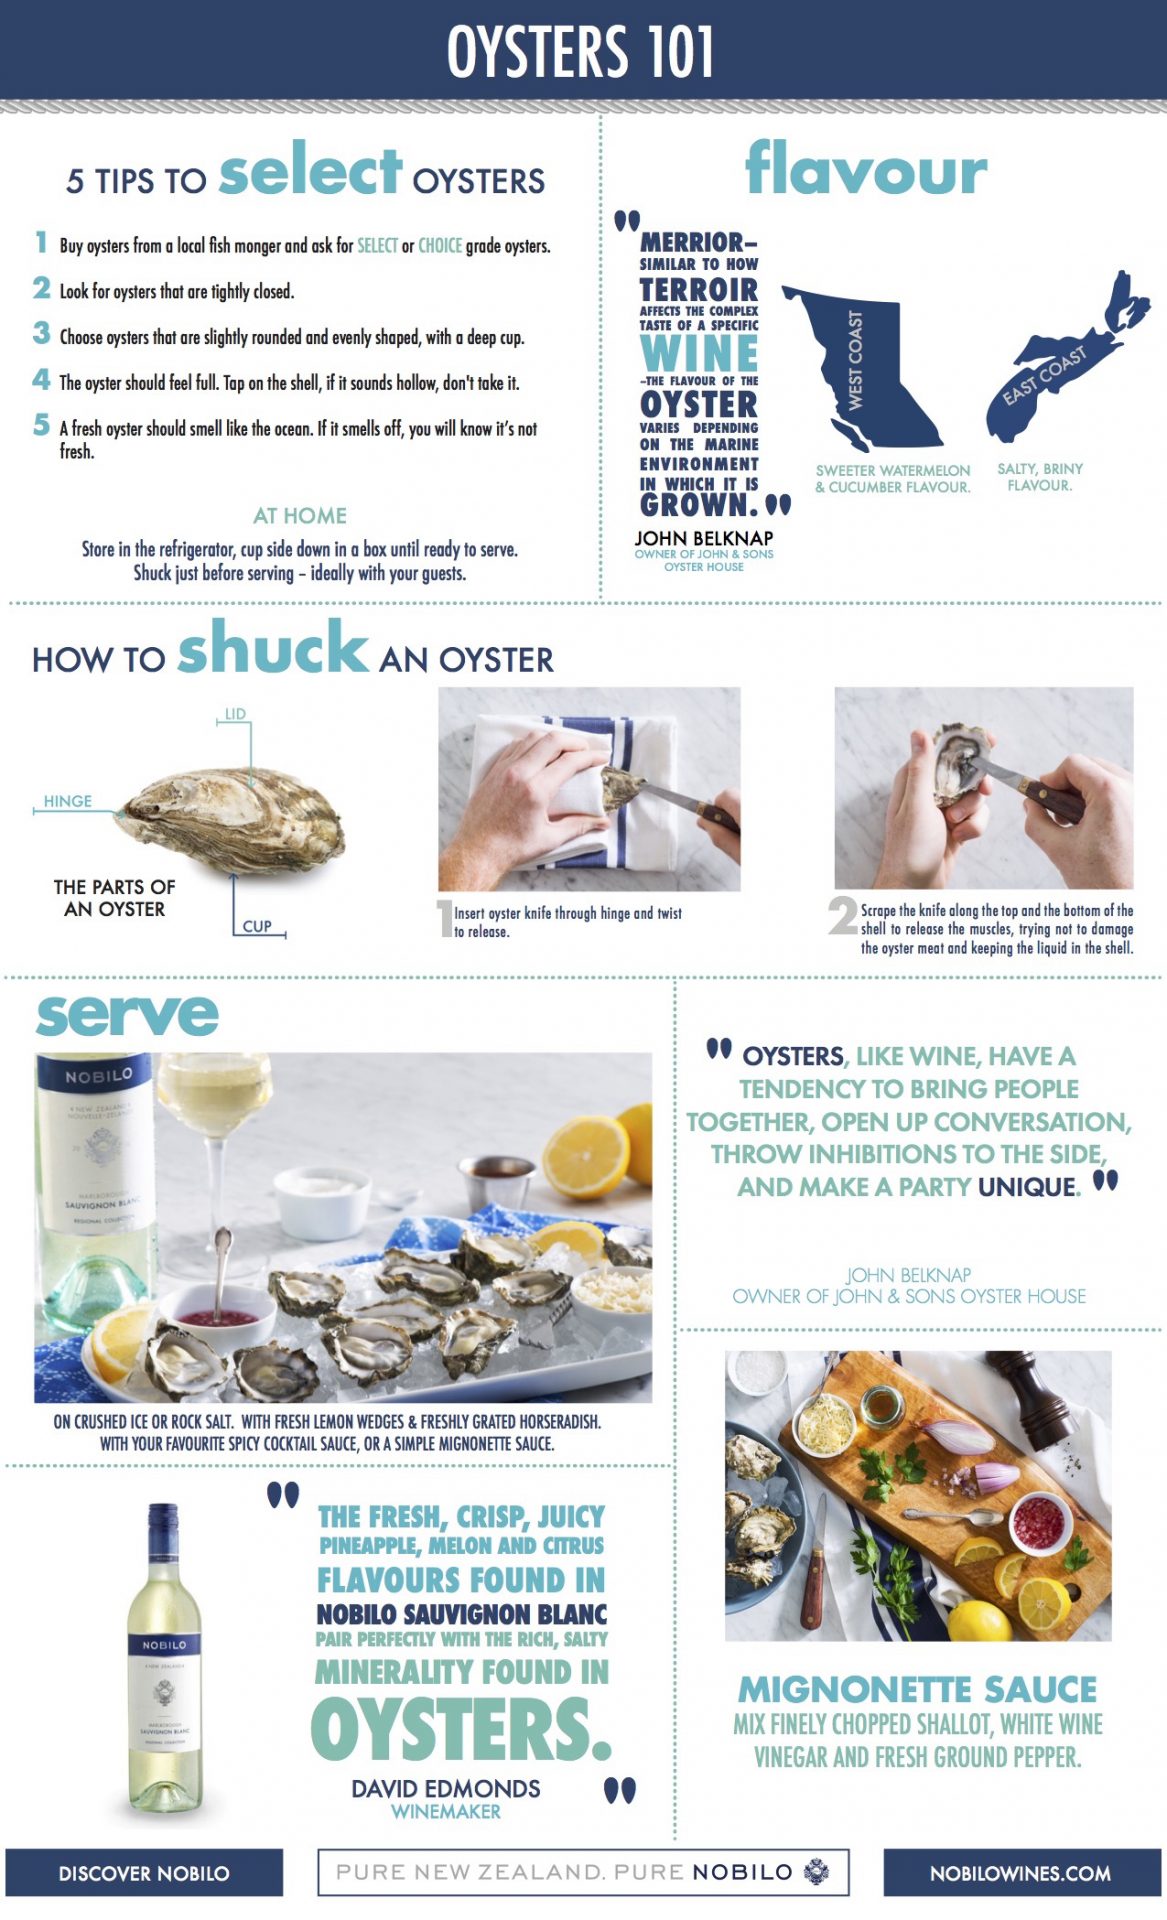 SELECT Ten Tips To Select Oysters Buy oysters from a local fish monger and ask for ‘Select’ or ‘Choice’ grade oysters. Look for oysters that are tightly closed. Avoid oysters that have a soft or spongy shell. Choose oysters that are slightly rounded and evenly shaped, with a deep cup. The oyster should feel full. Tap on the shell, if it sounds hollow, put it back, it’s probably dead. A fresh oyster should smell like the ocean. If it smells off, you will know it’s not fresh. Plan to buy for 3 - 6 oysters per person. Size doesn’t matter when it comes to taste. Oyster flavour varies depending on the marine environment in which they are grown – “Merrior – similar to how terroir affects the complex taste of a specific wine – the flavour of the oyster varies depending on the marine environment in which it is grown.” John Belknap, owner of John & Sons Oyster House. You can get fresh oysters all year long. Depending on the season, weather and availability, you can get fresh oysters from either Canadian coast. During Canadian summer months, enjoy oysters from the southern hemisphere where it is currently winter, like New Zealand, and the cold waters produce firm plump oysters.   When you bring the oysters home, store cup side down in a box or well ventilated basket in the refrigerator until ready to shuck and serve.  “Here in the Marlborough Sounds we have a Pacific Rock Oyster which is just delicious. The problem is, sometimes I find myself on a rocky piece of coast, surrounded by Rock Oysters, and the dilemma then becomes ‘how shredded am I prepared to let my fingers become before I’ve had enough oysters?’” Dave Edmonds, Nobilo Winemaker SHUCK Five Easy Steps to Shuck an Oyster Quick tip: Shuck just before serving. No more than an hour before consumption, preferably when your guests arrive - it is a great conversation starter. Items you need: Clean dish towel and oyster knife - Ensure you use a proper tool for shucking. An oyster knife costs about $8 -10. The flat part of the oyster is the lid and the rounded/deeper part is the cup – which holds the oyster and the briny liquid. The pointed end is the hinge. Lay the cup side down onto a dish towel and use the towel to securely hold the oyster down, with the hinge facing out. Insert the oyster knife through the hinge with the knife angled down. Twist the knife until you feel the hinge release. Then cut the two muscles by scraping the knife along the top of the shell to release the top muscle, then do the same to the bottom muscle. A quick hand motion down is best to release the bottom muscle without damaging the oyster meat. Check for any grit or shell fragments that may have fallen in and be careful not to spill any liquid.  SERVE, SAVOUR AND SIP Nobilo Sauvignon Blanc and oysters are the ultimate summer pairing! The crisp citrusy flavours of the wine work superbly with the salty minerality of the oysters. Serve oysters on crushed ice or rock salt. Serve with fresh lemon wedges and freshly grated horseradish, your favourite spicy cocktail sauce or a simple mignonette sauce. Serve with Nobilo Sauvignon Blanc, and savour the fresh, crisp, clean and tropical fruit flavours of the wine. Slide oyster into your mouth, chew and swallow. Take a sip of wine.  Enjoy. Repeat.  For a visual on how to shuck and serve oysters, check out the video on www.nobiloandoysters.com “Nobilo Sauvignon Blanc is a great match with any oyster. Of course the pineapple, melon and citrus notes are enough to get the palate going, but the bottom line for me is the juicy acidity we find in the wine that’s the ultimate foil to the richness and salinity of the oyster. Perhaps a little mignonette with your oyster? Why not mix it up with Nobilo Sauvignon Blanc instead of the wine vinegar.” Dave Edmonds, Nobilo Winemaker DISCOVER NOBILO: ABOUT NOBILO SAUVIGNON BLANC Nobilo Sauvignon Blanc represents the best of what New Zealand has to offer, with fresh, vivid classic flavours that consistently showcase the diverse qualities of the Marlborough region. Paired perfectly with seafood and summer salads, this wine offers aromas and flavours of tropical fruit. Available at the LCBO for $16.95. For more information, visit www.nobilowines.com. Share your Nobilo experience #NobiloWines #NobiloAndOysters  ABOUT JOHN BELKNAP, OWNER OF JOHN & SONS OYSTER HOUSE John is the proud owner of John & Sons Oyster House, which he started in 2008. A neighbourhood oyster house that brings the ease of a maritime pub to the heart of Old Toronto. John considers himself a compulsive entrepreneur that has been involved in the hospitality industry since the age of 15. His passion for oysters started at a party, where he saw oysters being shucked. As soon as those mysterious oysters started to be opened, he felt something magical happen. The room became more lively, like an energy was release. He had never seen this before - and so began his love of oyster shucking and passion for sharing the magic that comes with it.  Follow @johnandsonsoysterhouse